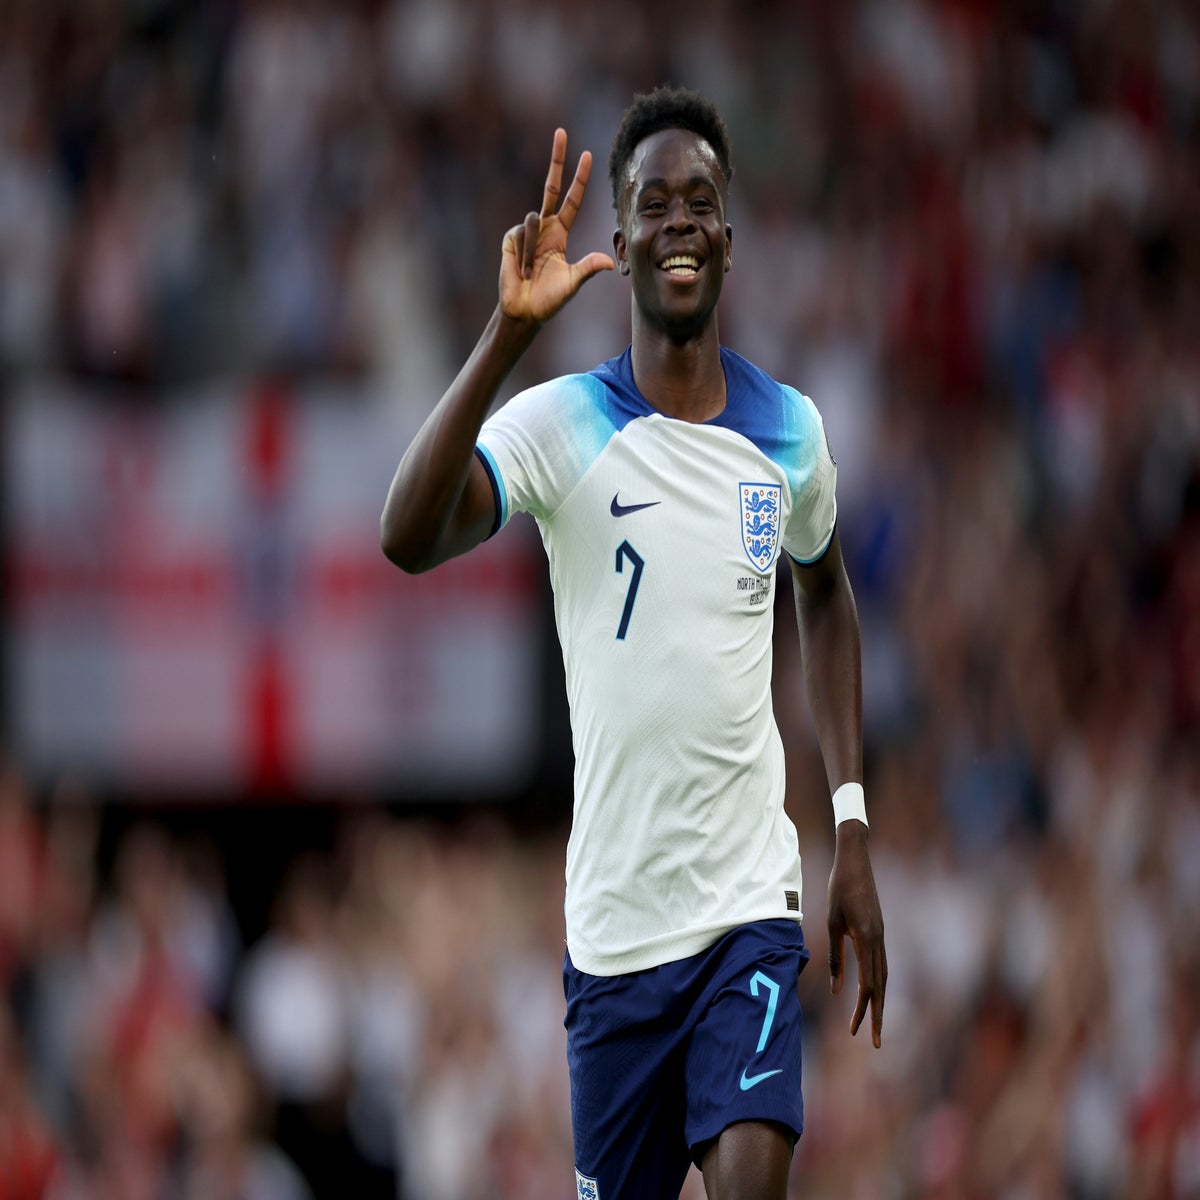 Bukayo Saka cements his place as England's next leading man with first  career hat-trick | The Independent